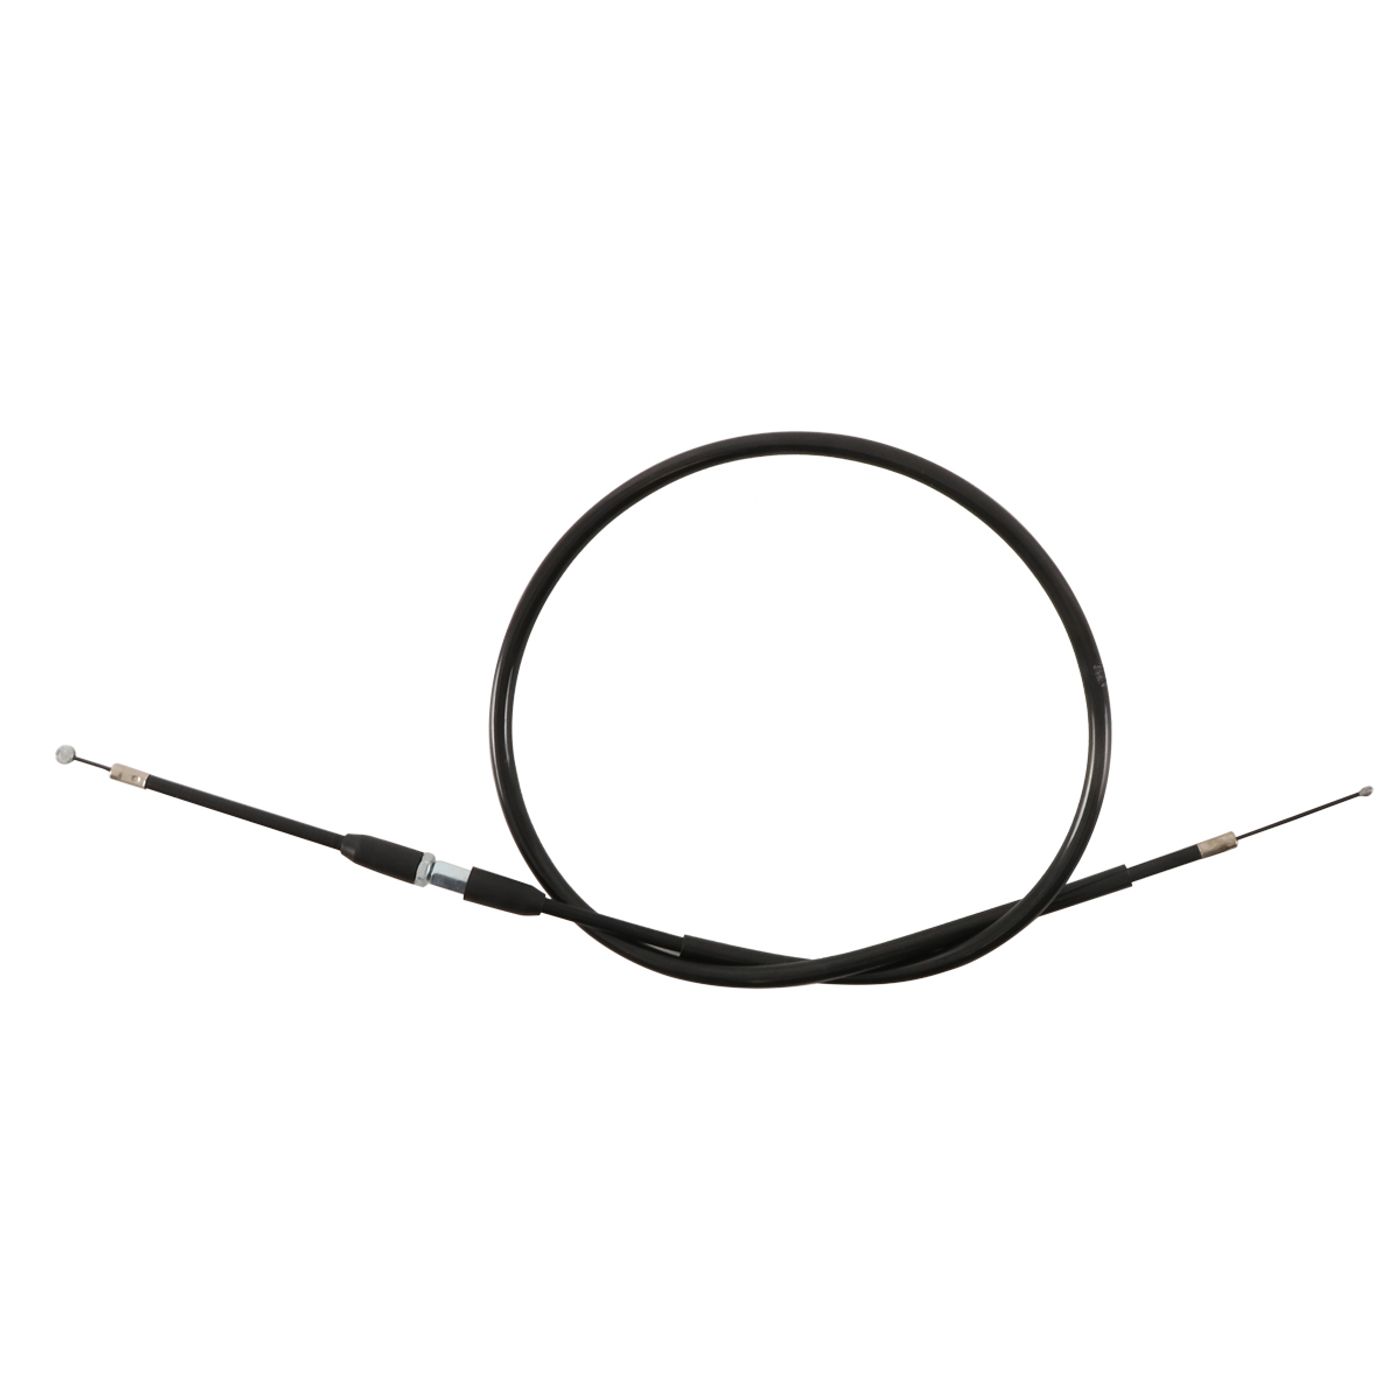 Wrp Clutch Cables - WRP453005 image